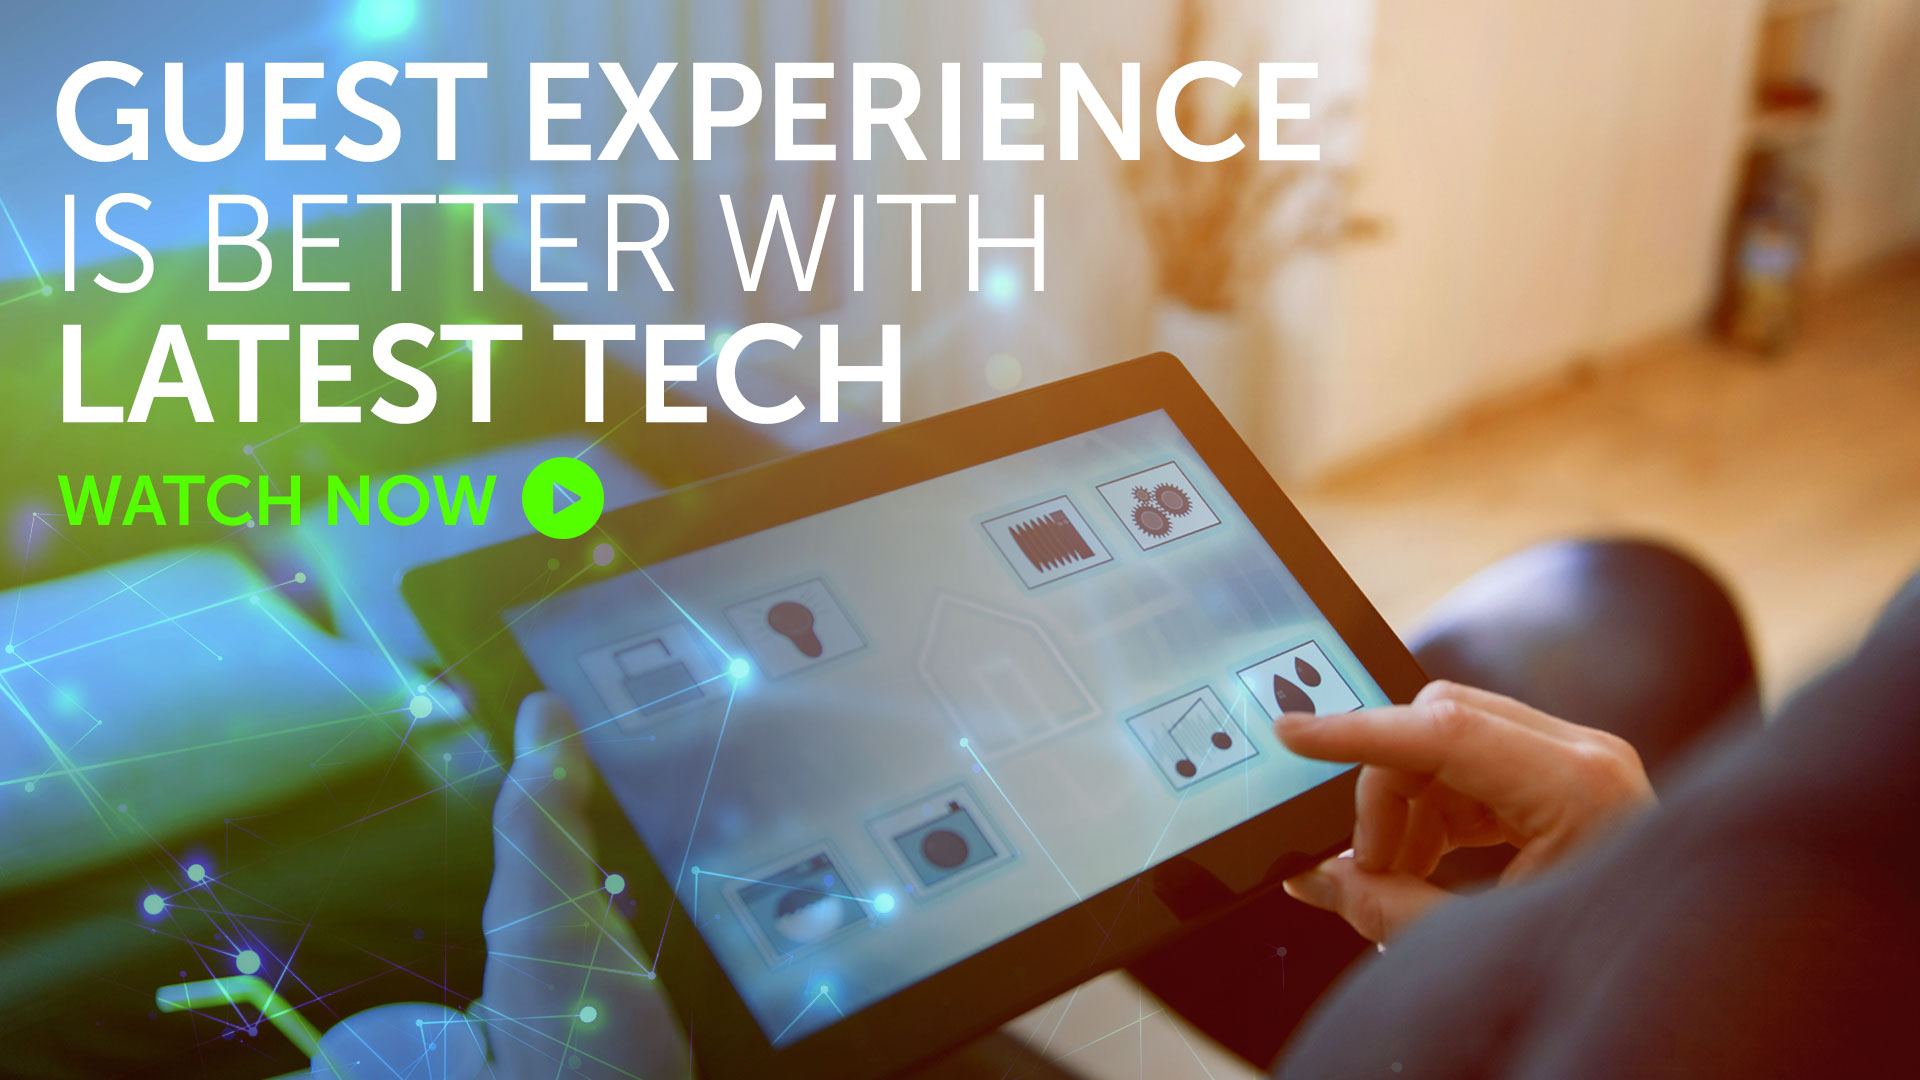 Briefing: Guest experience is better with latest tech